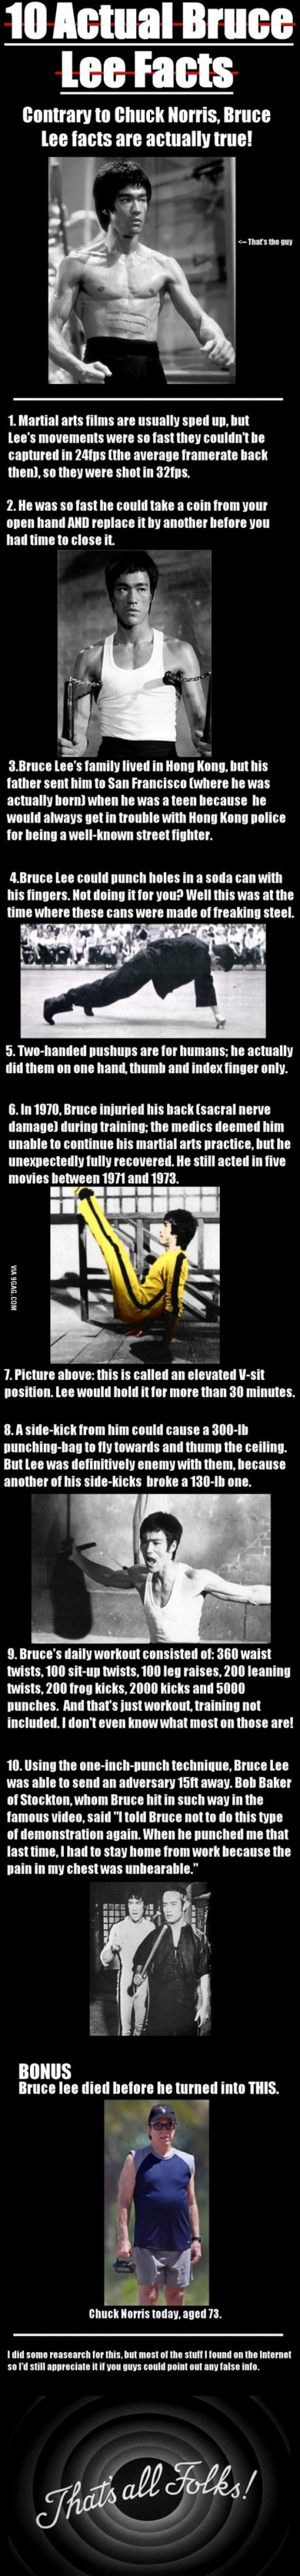 10 actual Bruce Lee facts.